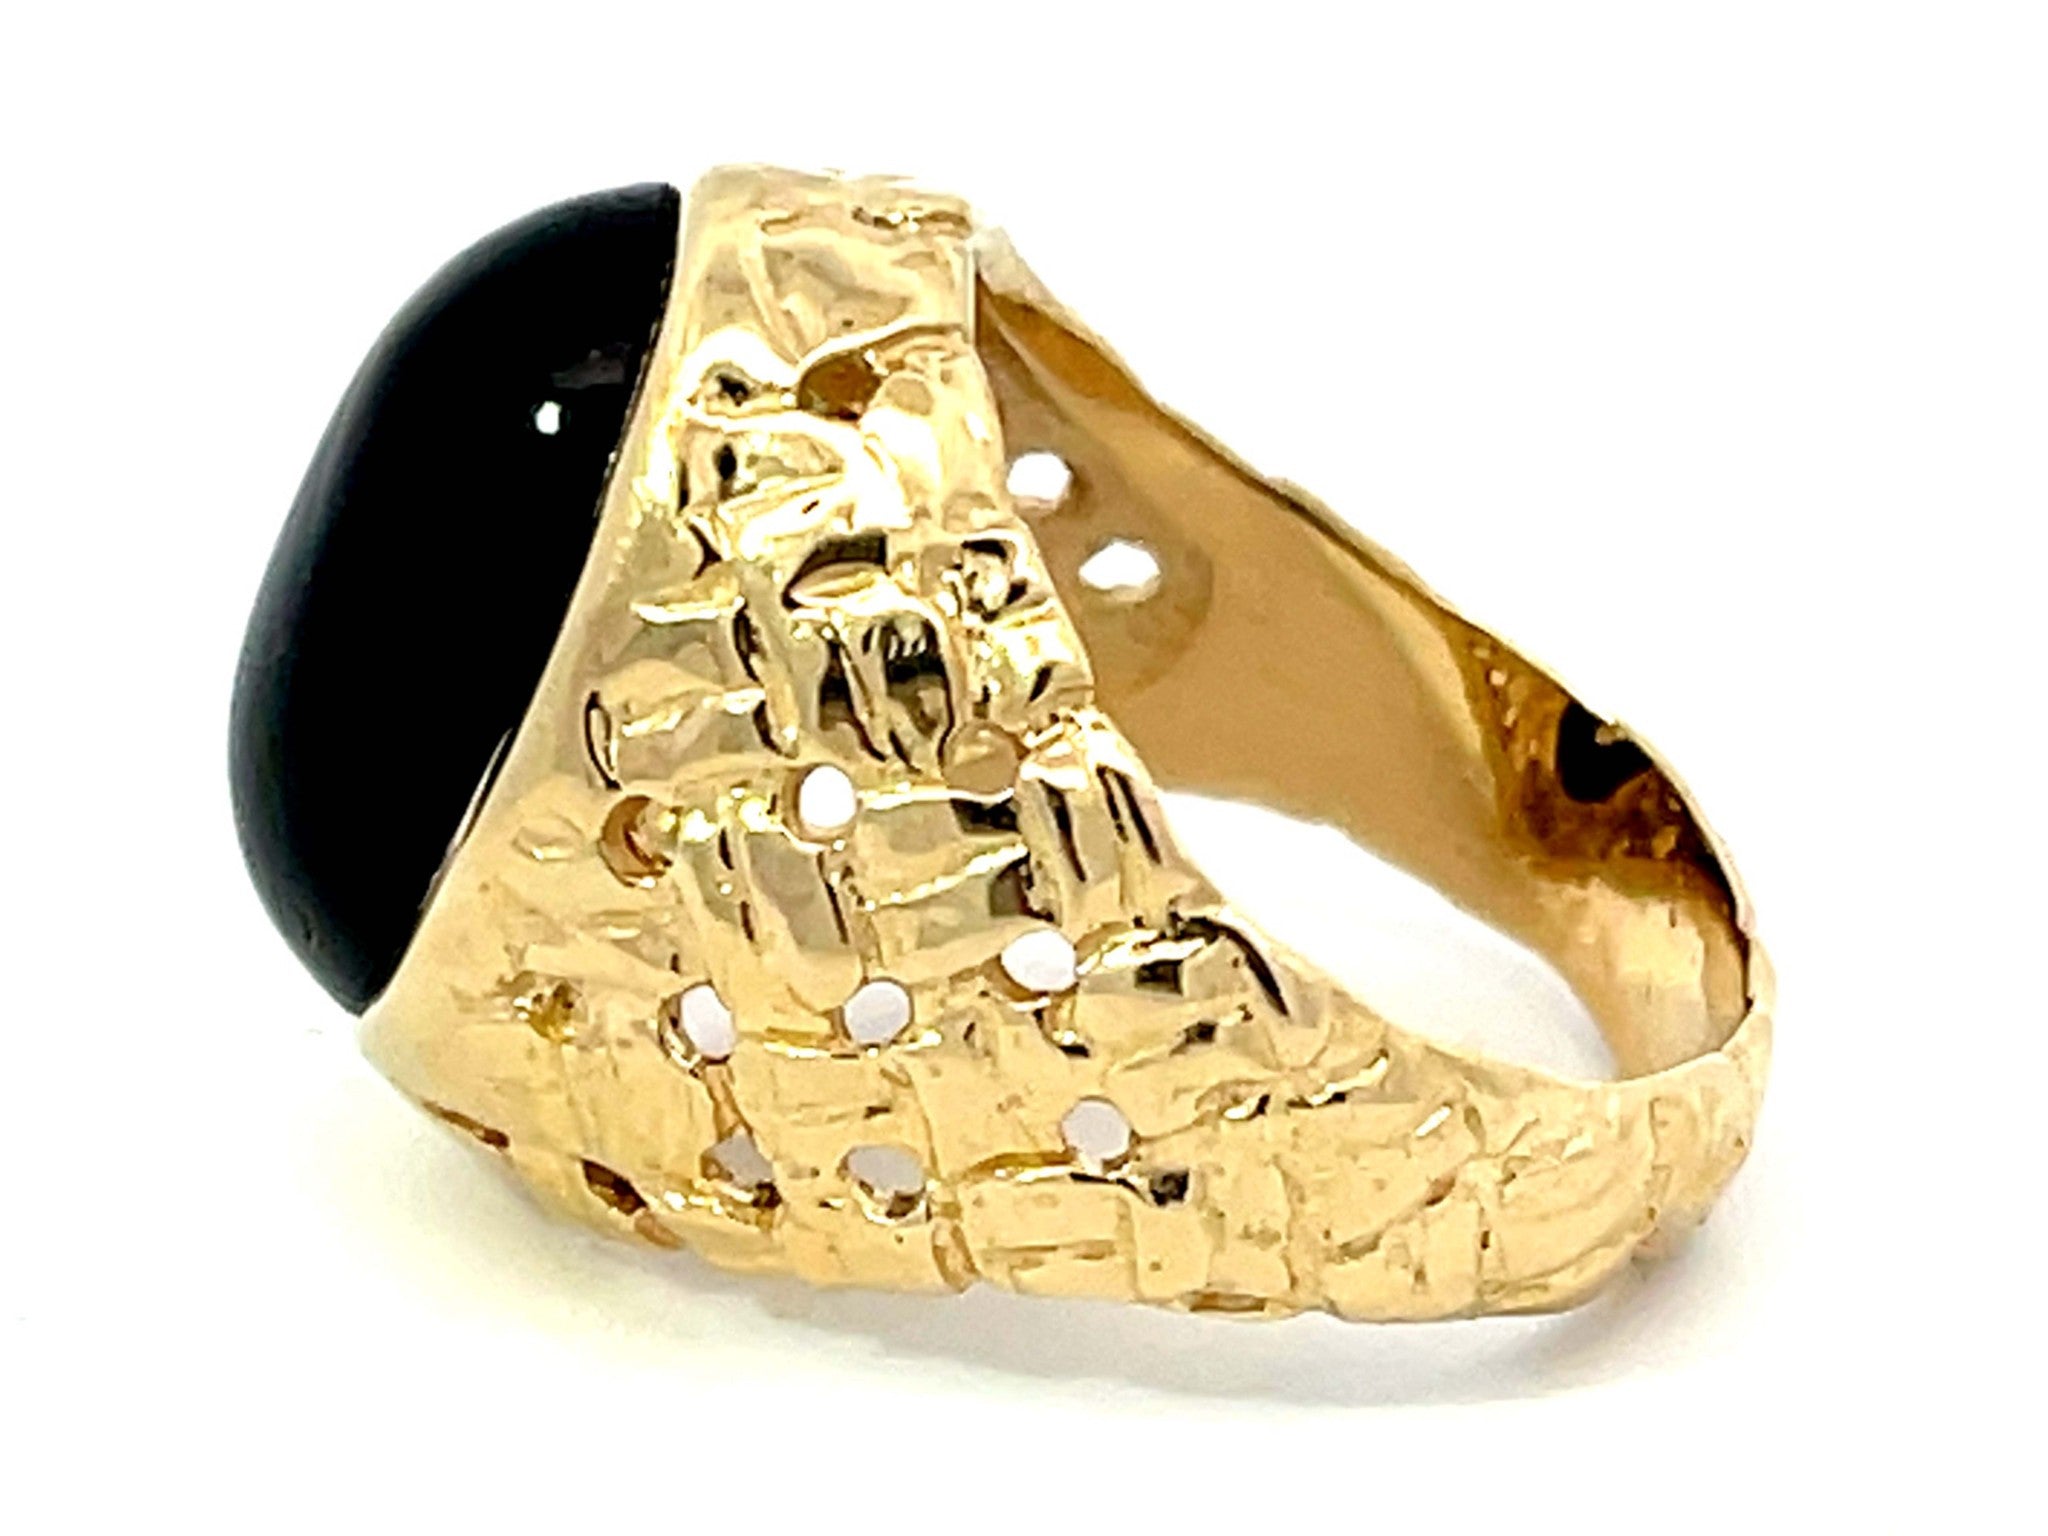 Black Oval Onyx Cabochon Ring in 14k Yellow Gold